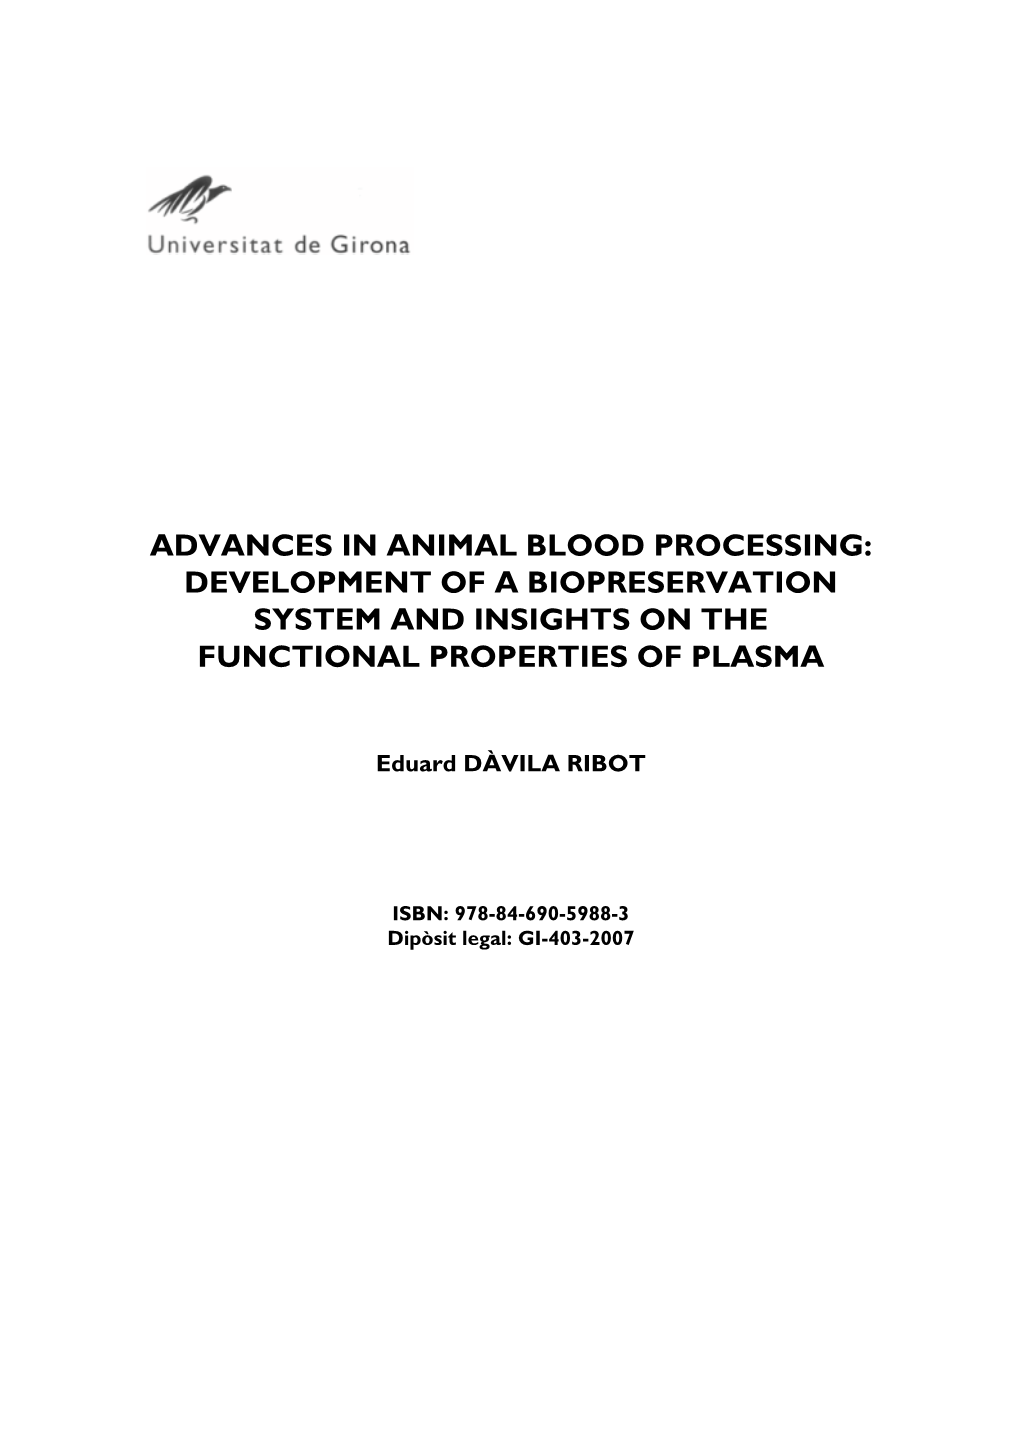 Advances in Animal Blood Processing: Development of a Biopreservation System and Insights on the Functional Properties of Plasma